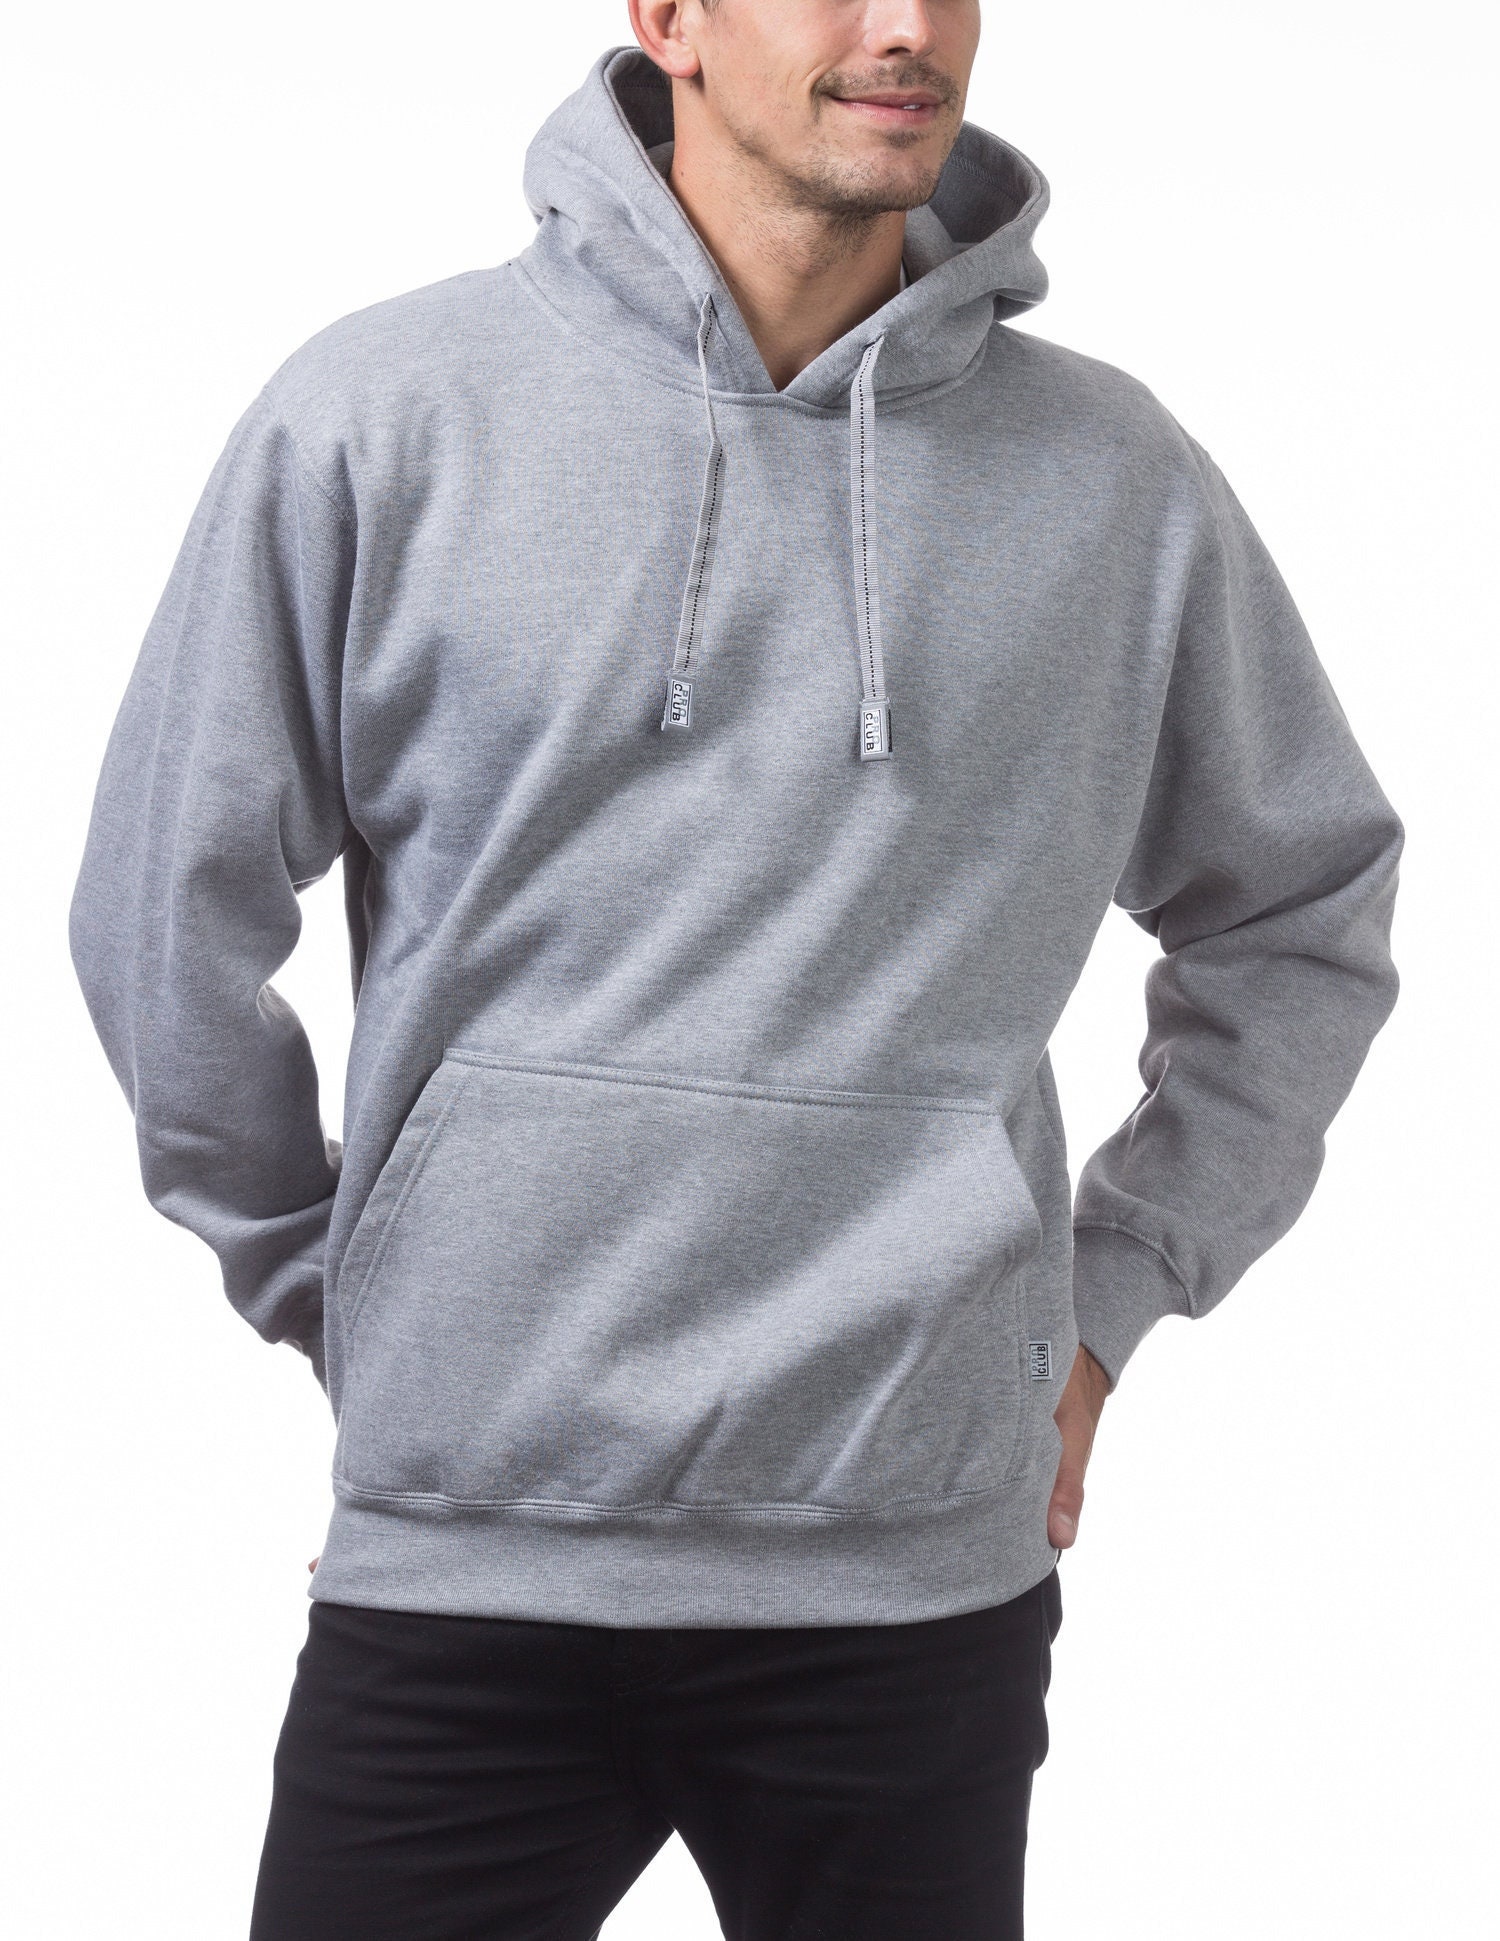 Pro Club Men's XL Heather Gray Heavy Weight Pullover - Etsy